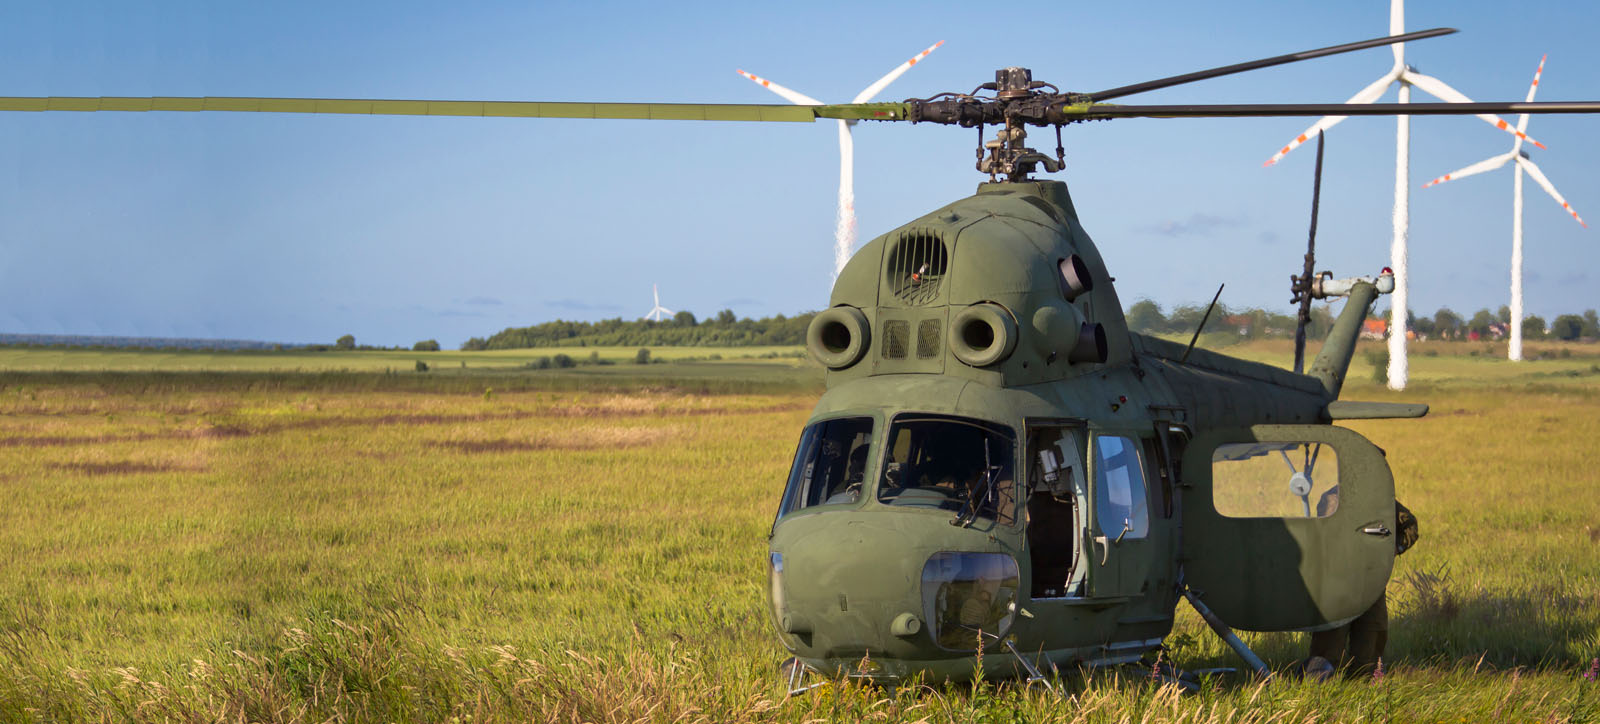 A military helicopter lands in a field in front of a wind farm